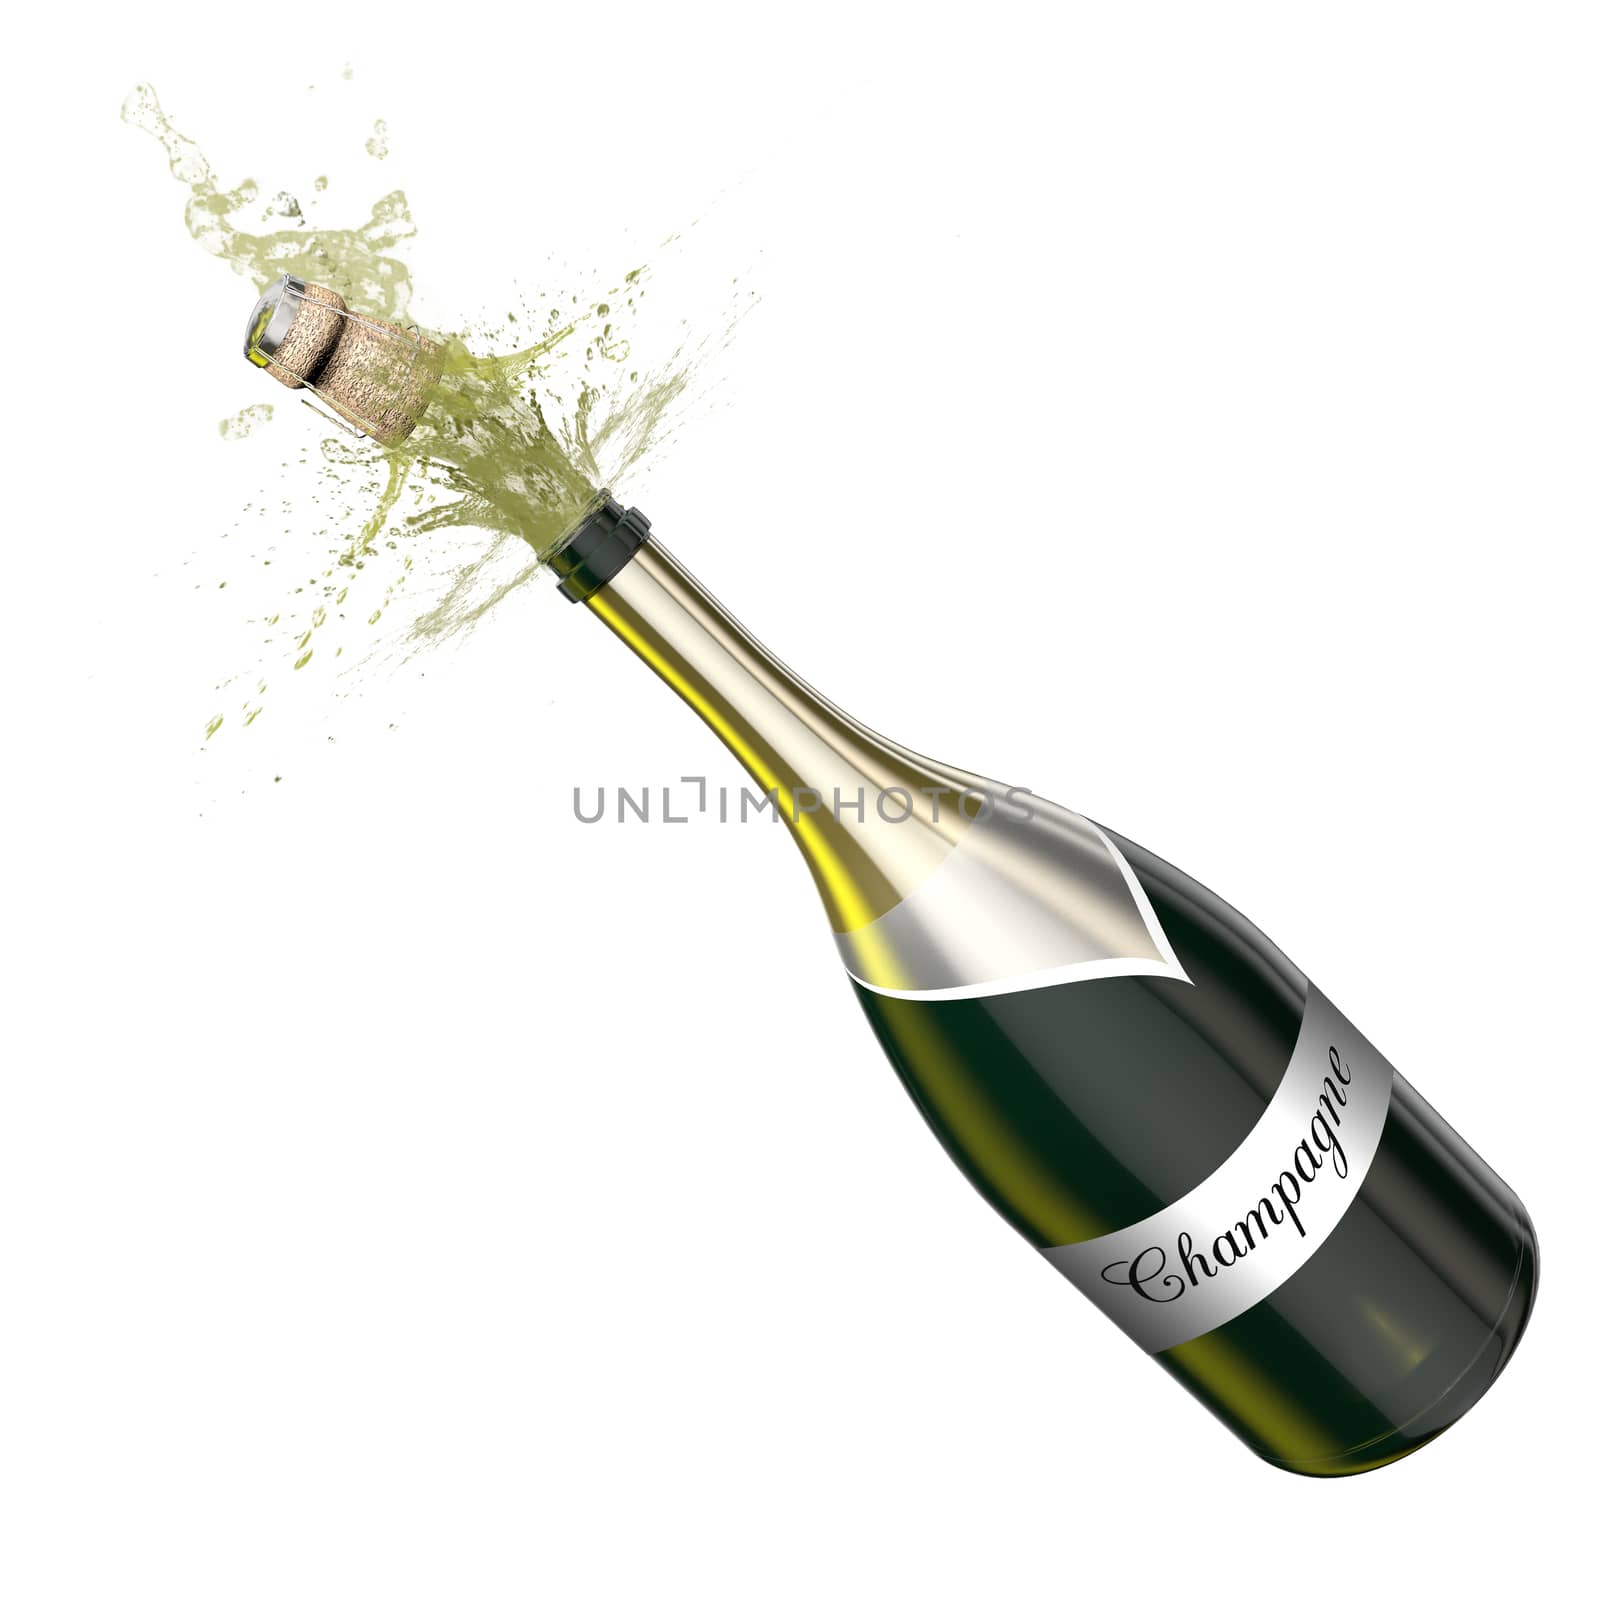 Opened bottle of champagne foaming with flying cork. This illustration represents the celebration.